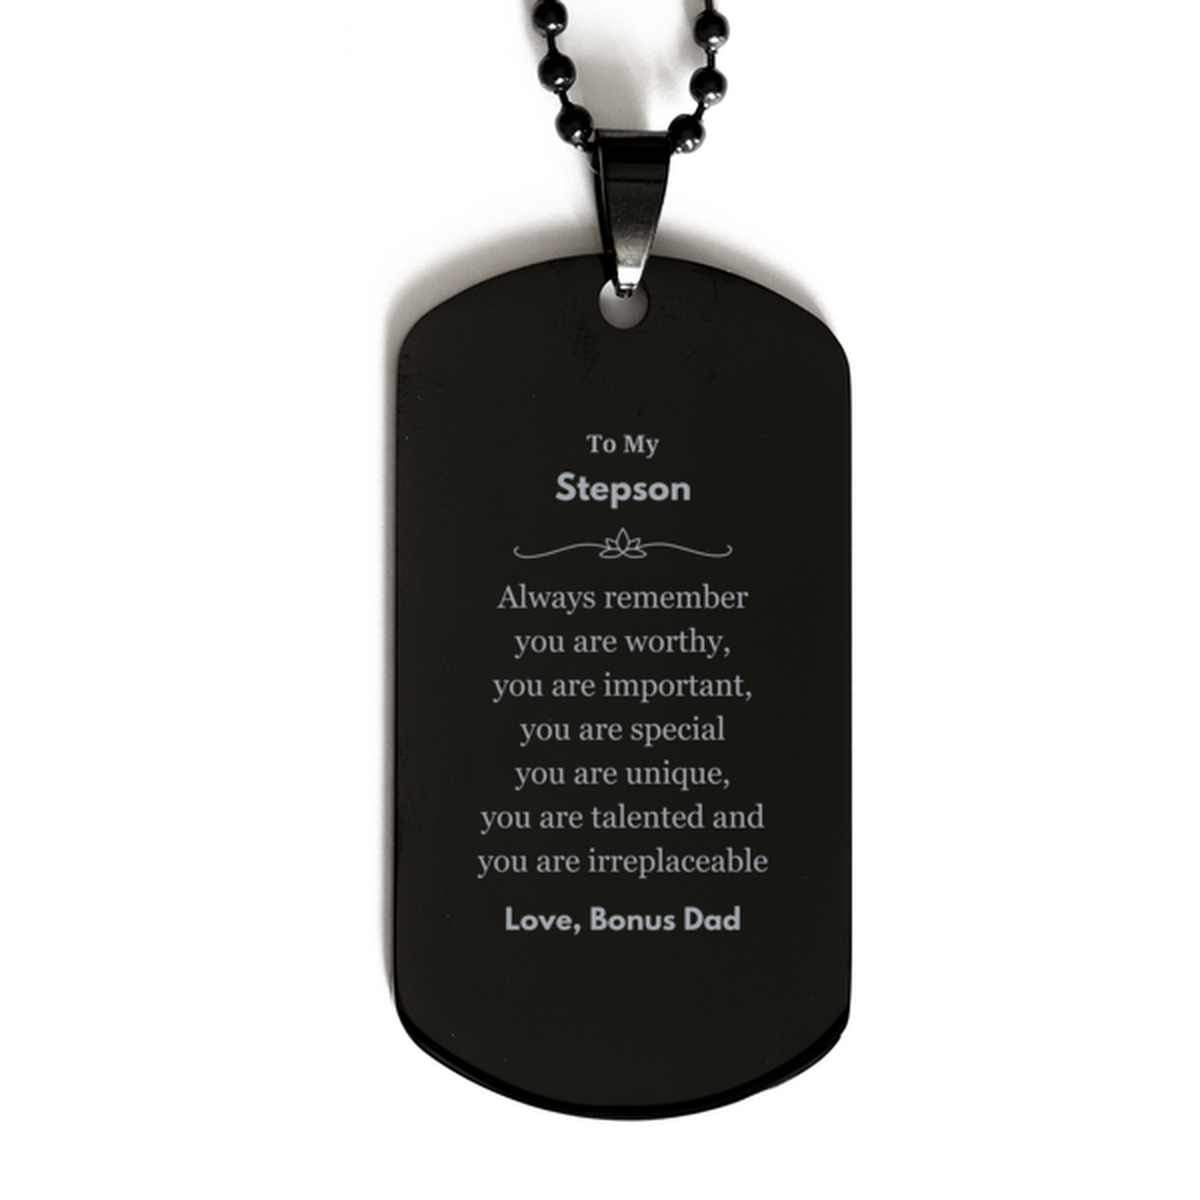 Stepson Birthday Gifts from Bonus Dad, Inspirational Black Dog Tag for Stepson Christmas Graduation Gifts for Stepson Always remember you are worthy, you are important. Love, Bonus Dad